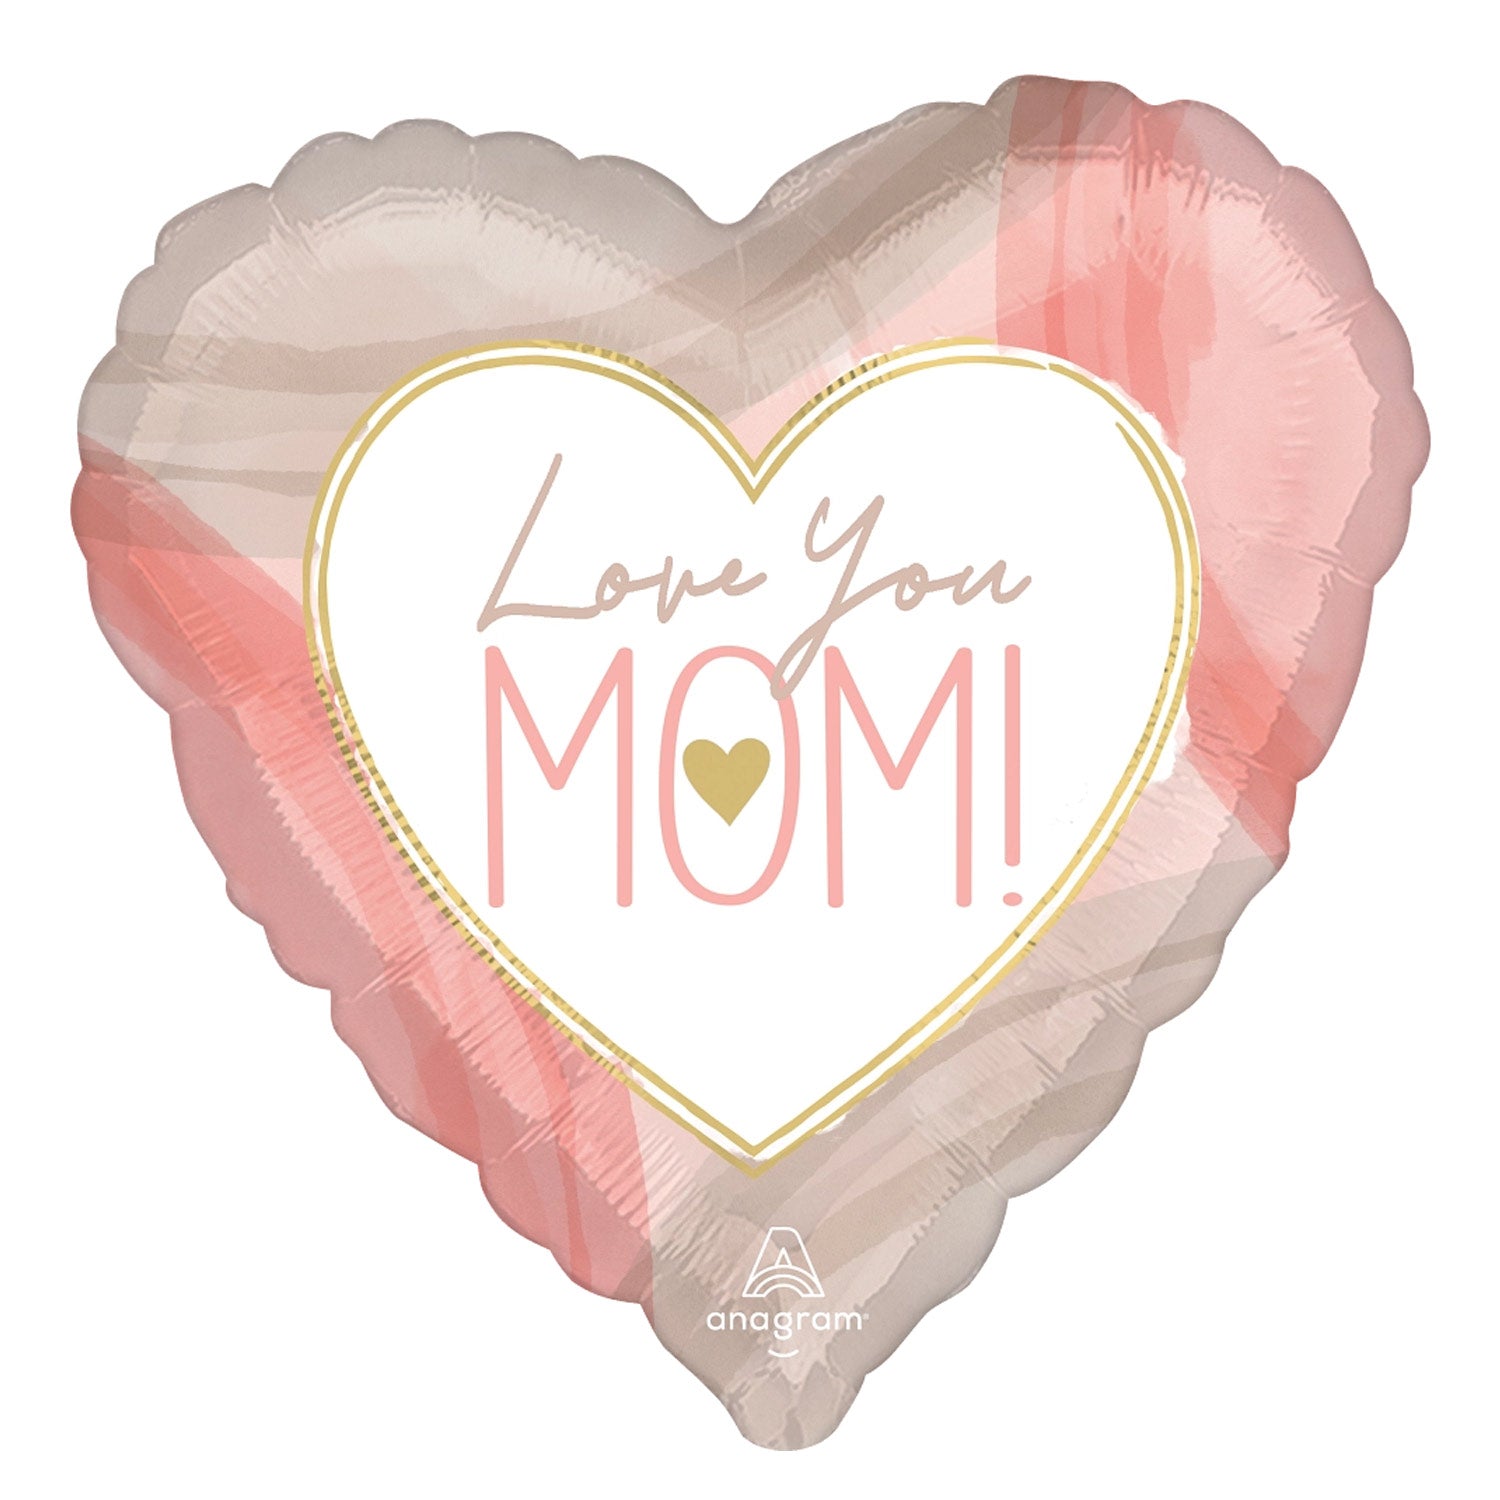 Love you Mom Cutout Collage Foil Balloon 18in